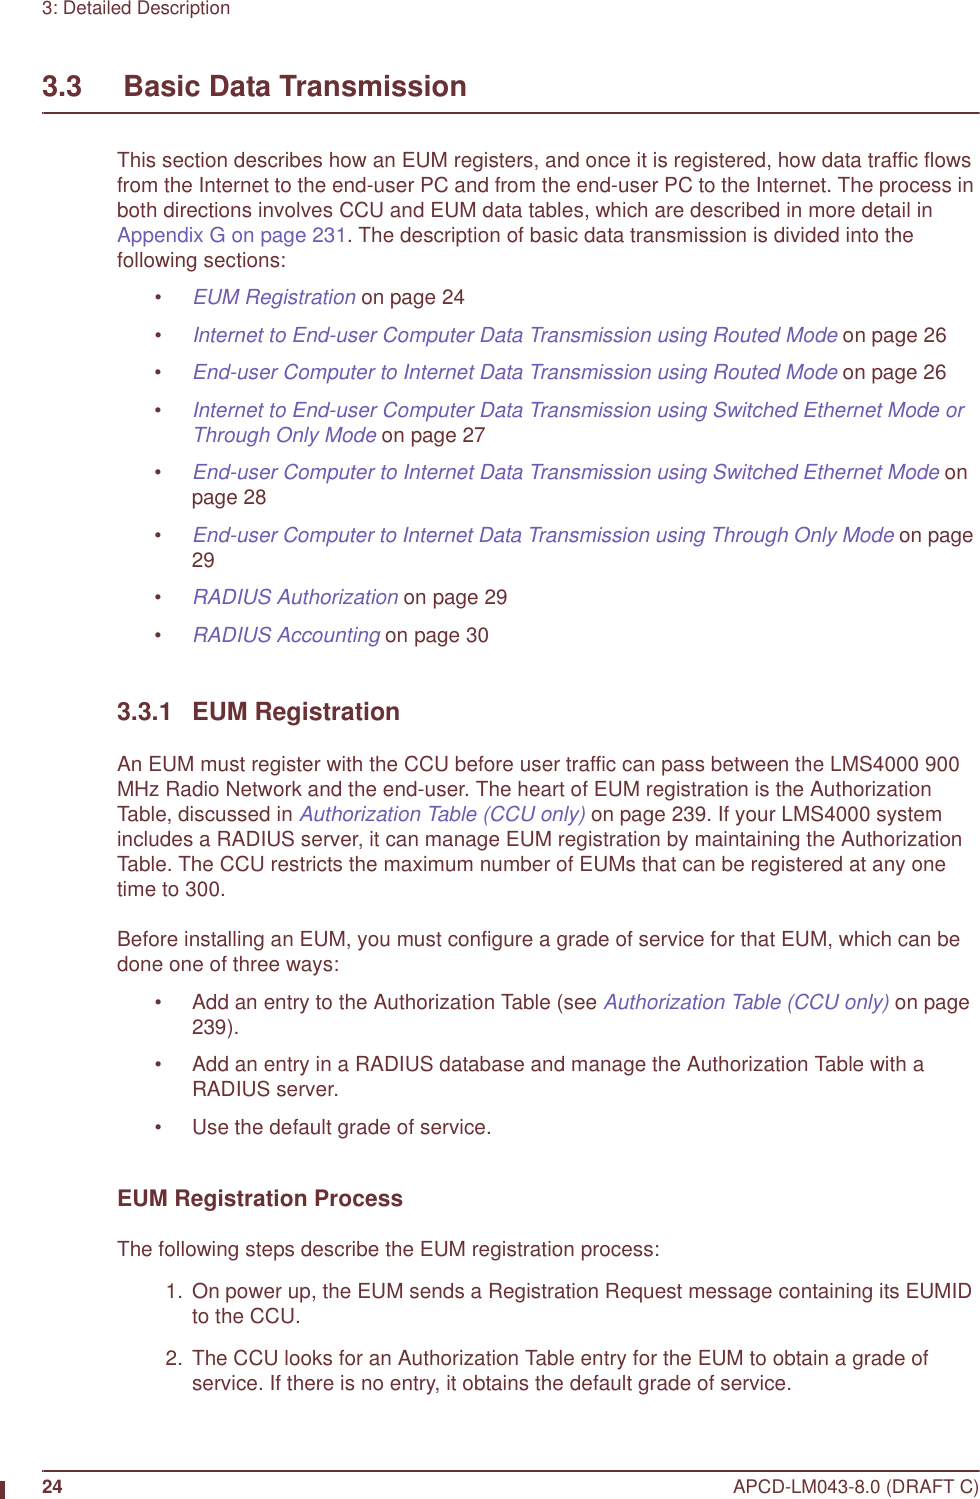 24 APCD-LM043-8.0 (DRAFT C)3: Detailed Description3.3     Basic Data TransmissionThis section describes how an EUM registers, and once it is registered, how data traffic flows from the Internet to the end-user PC and from the end-user PC to the Internet. The process in both directions involves CCU and EUM data tables, which are described in more detail in Appendix G on page 231. The description of basic data transmission is divided into the following sections:•EUM Registration on page 24•Internet to End-user Computer Data Transmission using Routed Mode on page 26•End-user Computer to Internet Data Transmission using Routed Mode on page 26•Internet to End-user Computer Data Transmission using Switched Ethernet Mode or Through Only Mode on page 27•End-user Computer to Internet Data Transmission using Switched Ethernet Mode on page 28•End-user Computer to Internet Data Transmission using Through Only Mode on page 29•RADIUS Authorization on page 29•RADIUS Accounting on page 303.3.1 EUM RegistrationAn EUM must register with the CCU before user traffic can pass between the LMS4000 900 MHz Radio Network and the end-user. The heart of EUM registration is the Authorization Table, discussed in Authorization Table (CCU only) on page 239. If your LMS4000 system includes a RADIUS server, it can manage EUM registration by maintaining the Authorization Table. The CCU restricts the maximum number of EUMs that can be registered at any one time to 300. Before installing an EUM, you must configure a grade of service for that EUM, which can be done one of three ways: • Add an entry to the Authorization Table (see Authorization Table (CCU only) on page 239).• Add an entry in a RADIUS database and manage the Authorization Table with a RADIUS server.• Use the default grade of service.EUM Registration ProcessThe following steps describe the EUM registration process:  1.  On power up, the EUM sends a Registration Request message containing its EUMID to the CCU.  2. The CCU looks for an Authorization Table entry for the EUM to obtain a grade of service. If there is no entry, it obtains the default grade of service.